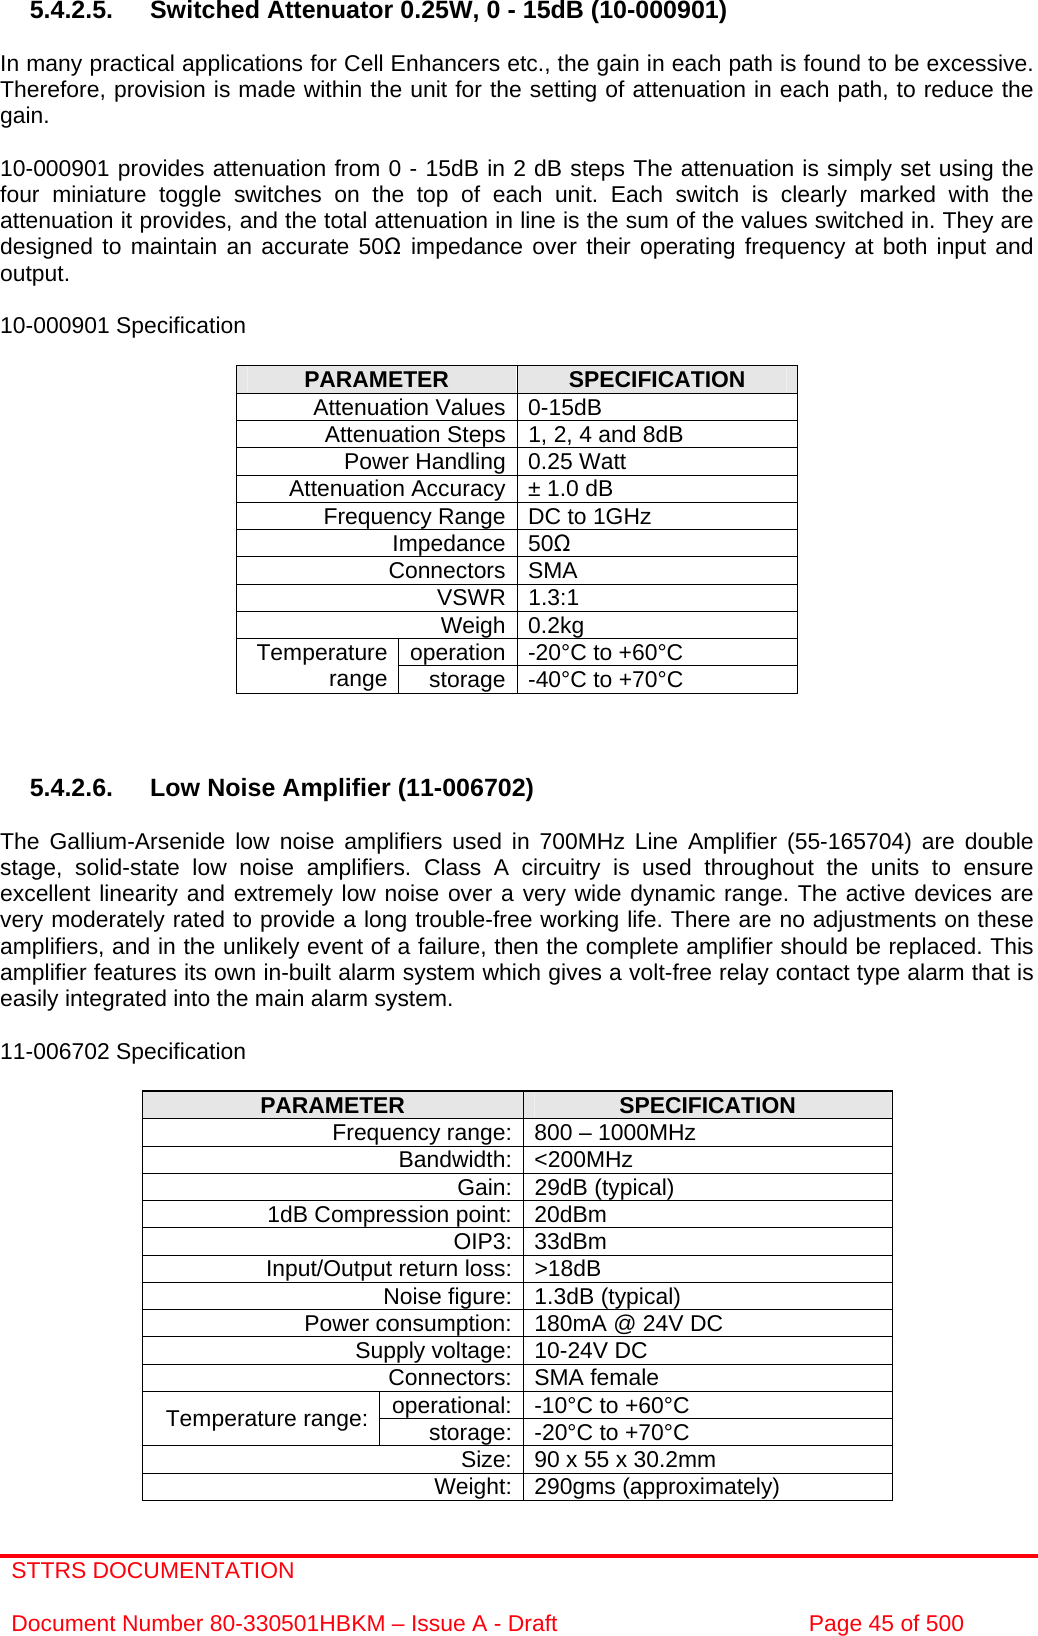 STTRS DOCUMENTATION  Document Number 80-330501HBKM – Issue A - Draft  Page 45 of 500   5.4.2.5. Switched Attenuator 0.25W, 0 - 15dB (10-000901)  In many practical applications for Cell Enhancers etc., the gain in each path is found to be excessive. Therefore, provision is made within the unit for the setting of attenuation in each path, to reduce the gain.  10-000901 provides attenuation from 0 - 15dB in 2 dB steps The attenuation is simply set using the four miniature toggle switches on the top of each unit. Each switch is clearly marked with the attenuation it provides, and the total attenuation in line is the sum of the values switched in. They are designed to maintain an accurate 50 impedance over their operating frequency at both input and output.  10-000901 Specification  PARAMETER  SPECIFICATION Attenuation Values 0-15dB Attenuation Steps 1, 2, 4 and 8dB Power Handling 0.25 Watt Attenuation Accuracy ± 1.0 dB Frequency Range DC to 1GHz Impedance 50 Connectors SMA VSWR 1.3:1 Weigh 0.2kg operation -20°C to +60°C Temperature range  storage -40°C to +70°C    5.4.2.6.  Low Noise Amplifier (11-006702)  The Gallium-Arsenide low noise amplifiers used in 700MHz Line Amplifier (55-165704) are double stage, solid-state low noise amplifiers. Class A circuitry is used throughout the units to ensure excellent linearity and extremely low noise over a very wide dynamic range. The active devices are very moderately rated to provide a long trouble-free working life. There are no adjustments on these amplifiers, and in the unlikely event of a failure, then the complete amplifier should be replaced. This amplifier features its own in-built alarm system which gives a volt-free relay contact type alarm that is easily integrated into the main alarm system.  11-006702 Specification  PARAMETER  SPECIFICATION Frequency range: 800 – 1000MHz Bandwidth: &lt;200MHz Gain: 29dB (typical) 1dB Compression point: 20dBm OIP3: 33dBm Input/Output return loss: &gt;18dB Noise figure: 1.3dB (typical) Power consumption: 180mA @ 24V DC Supply voltage: 10-24V DC Connectors: SMA female operational: -10°C to +60°C Temperature range:  storage: -20°C to +70°C Size: 90 x 55 x 30.2mm Weight: 290gms (approximately) 